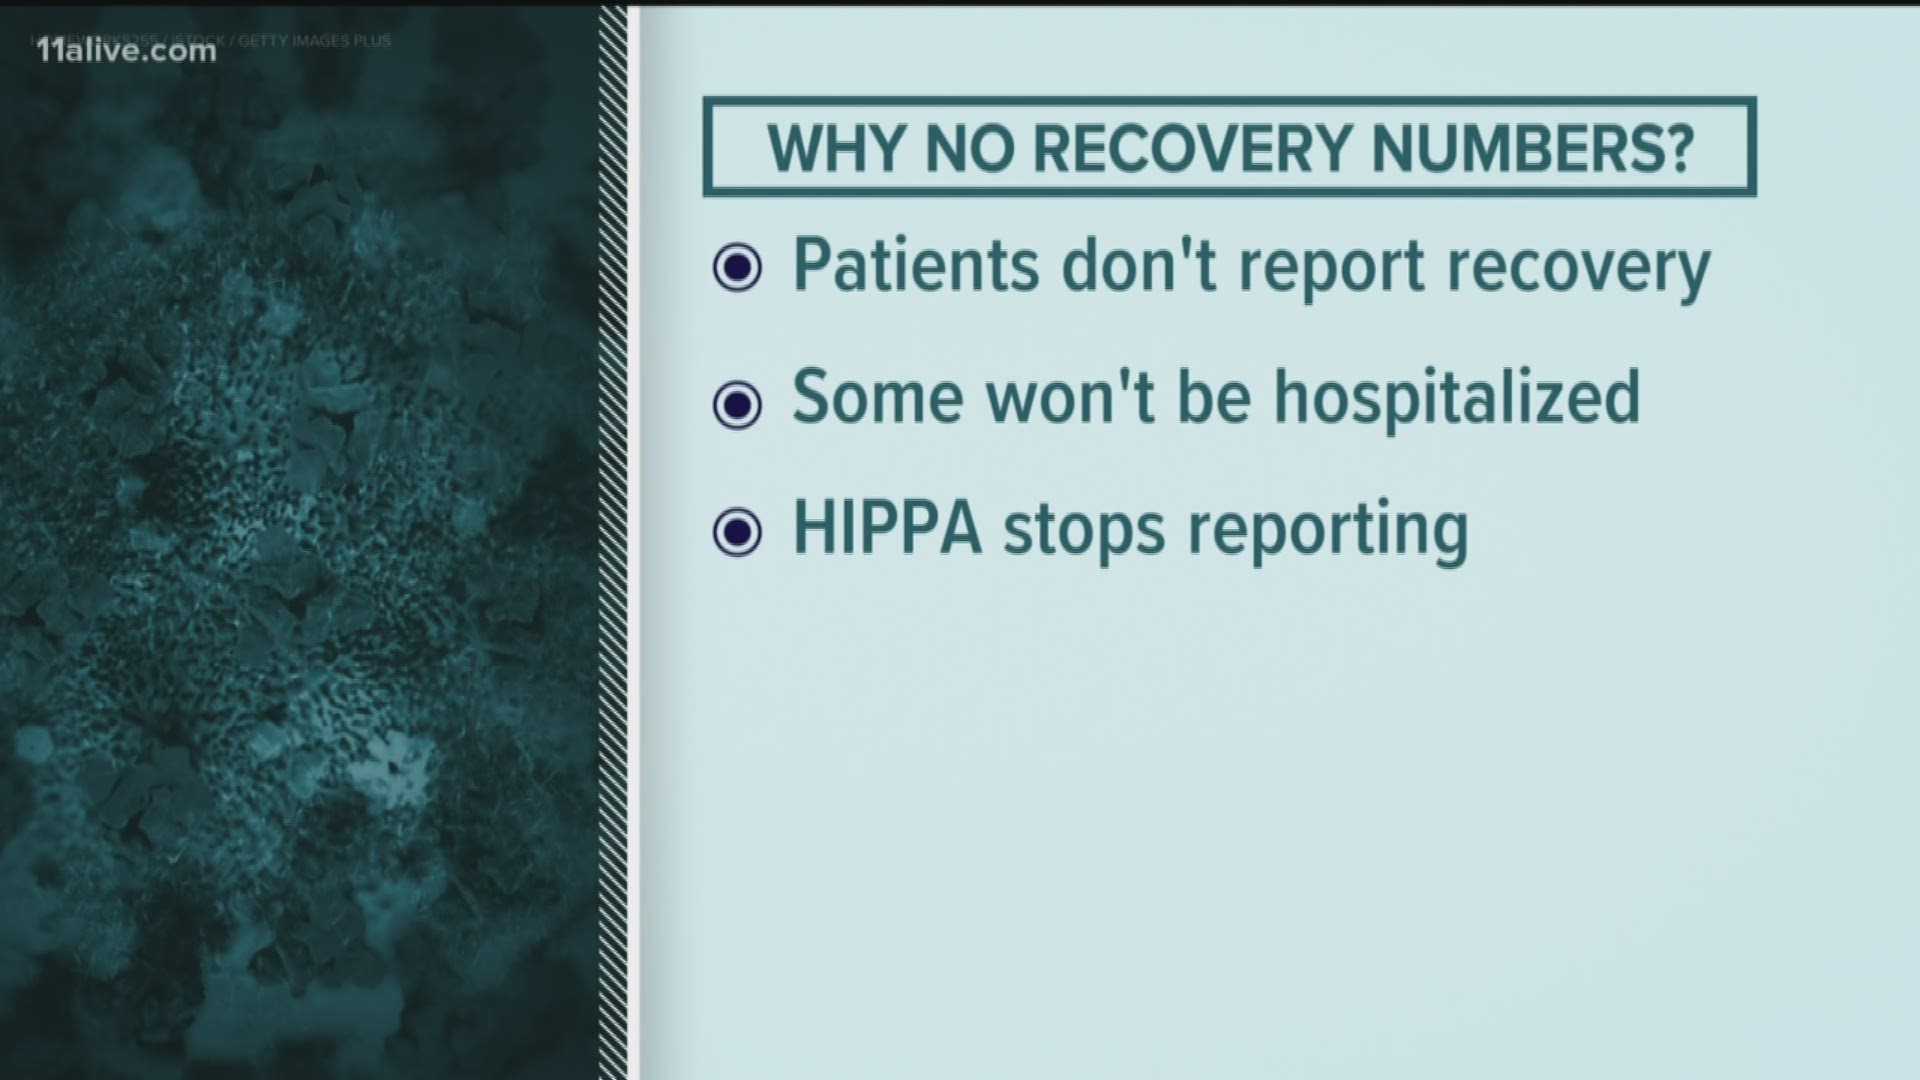 Many won't call their doctor and report that they have recovered.